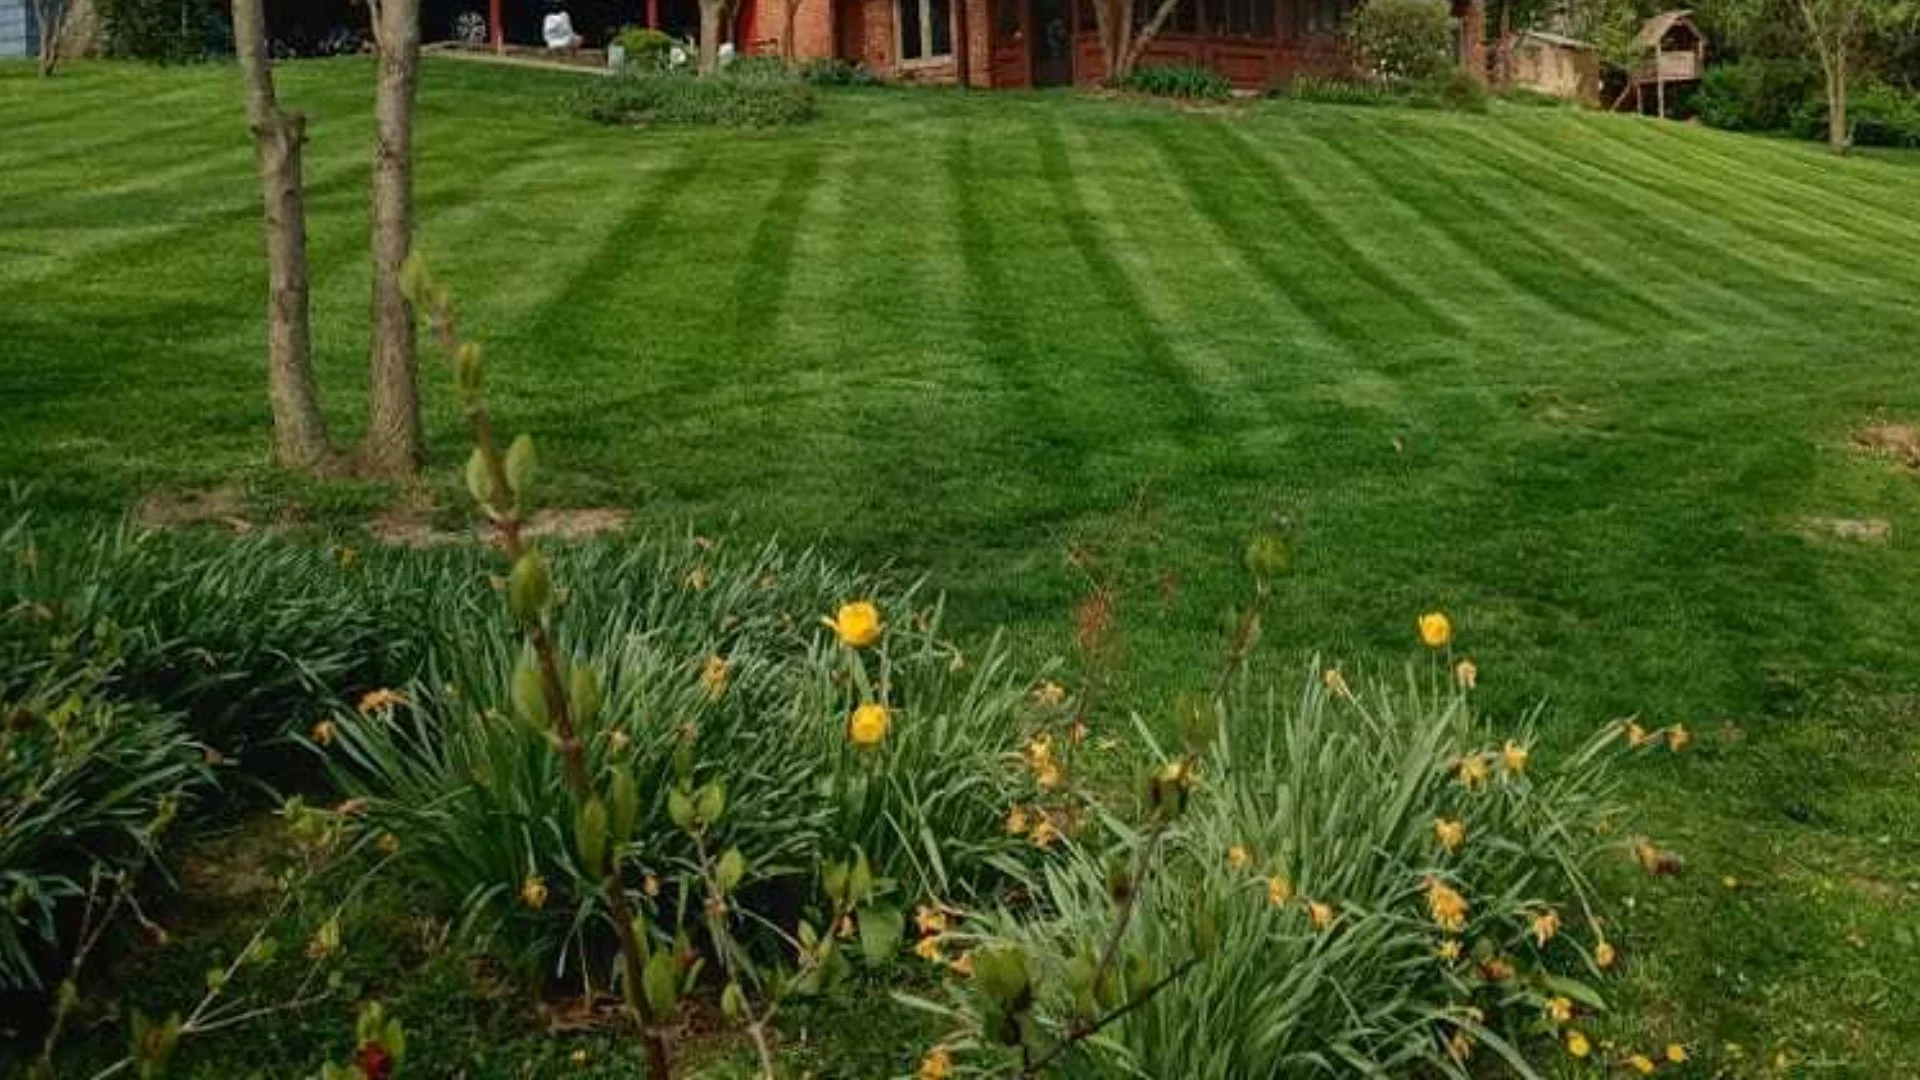 Spring Fertilization Will Set up Your Lawn for a Healthy Growing Season!